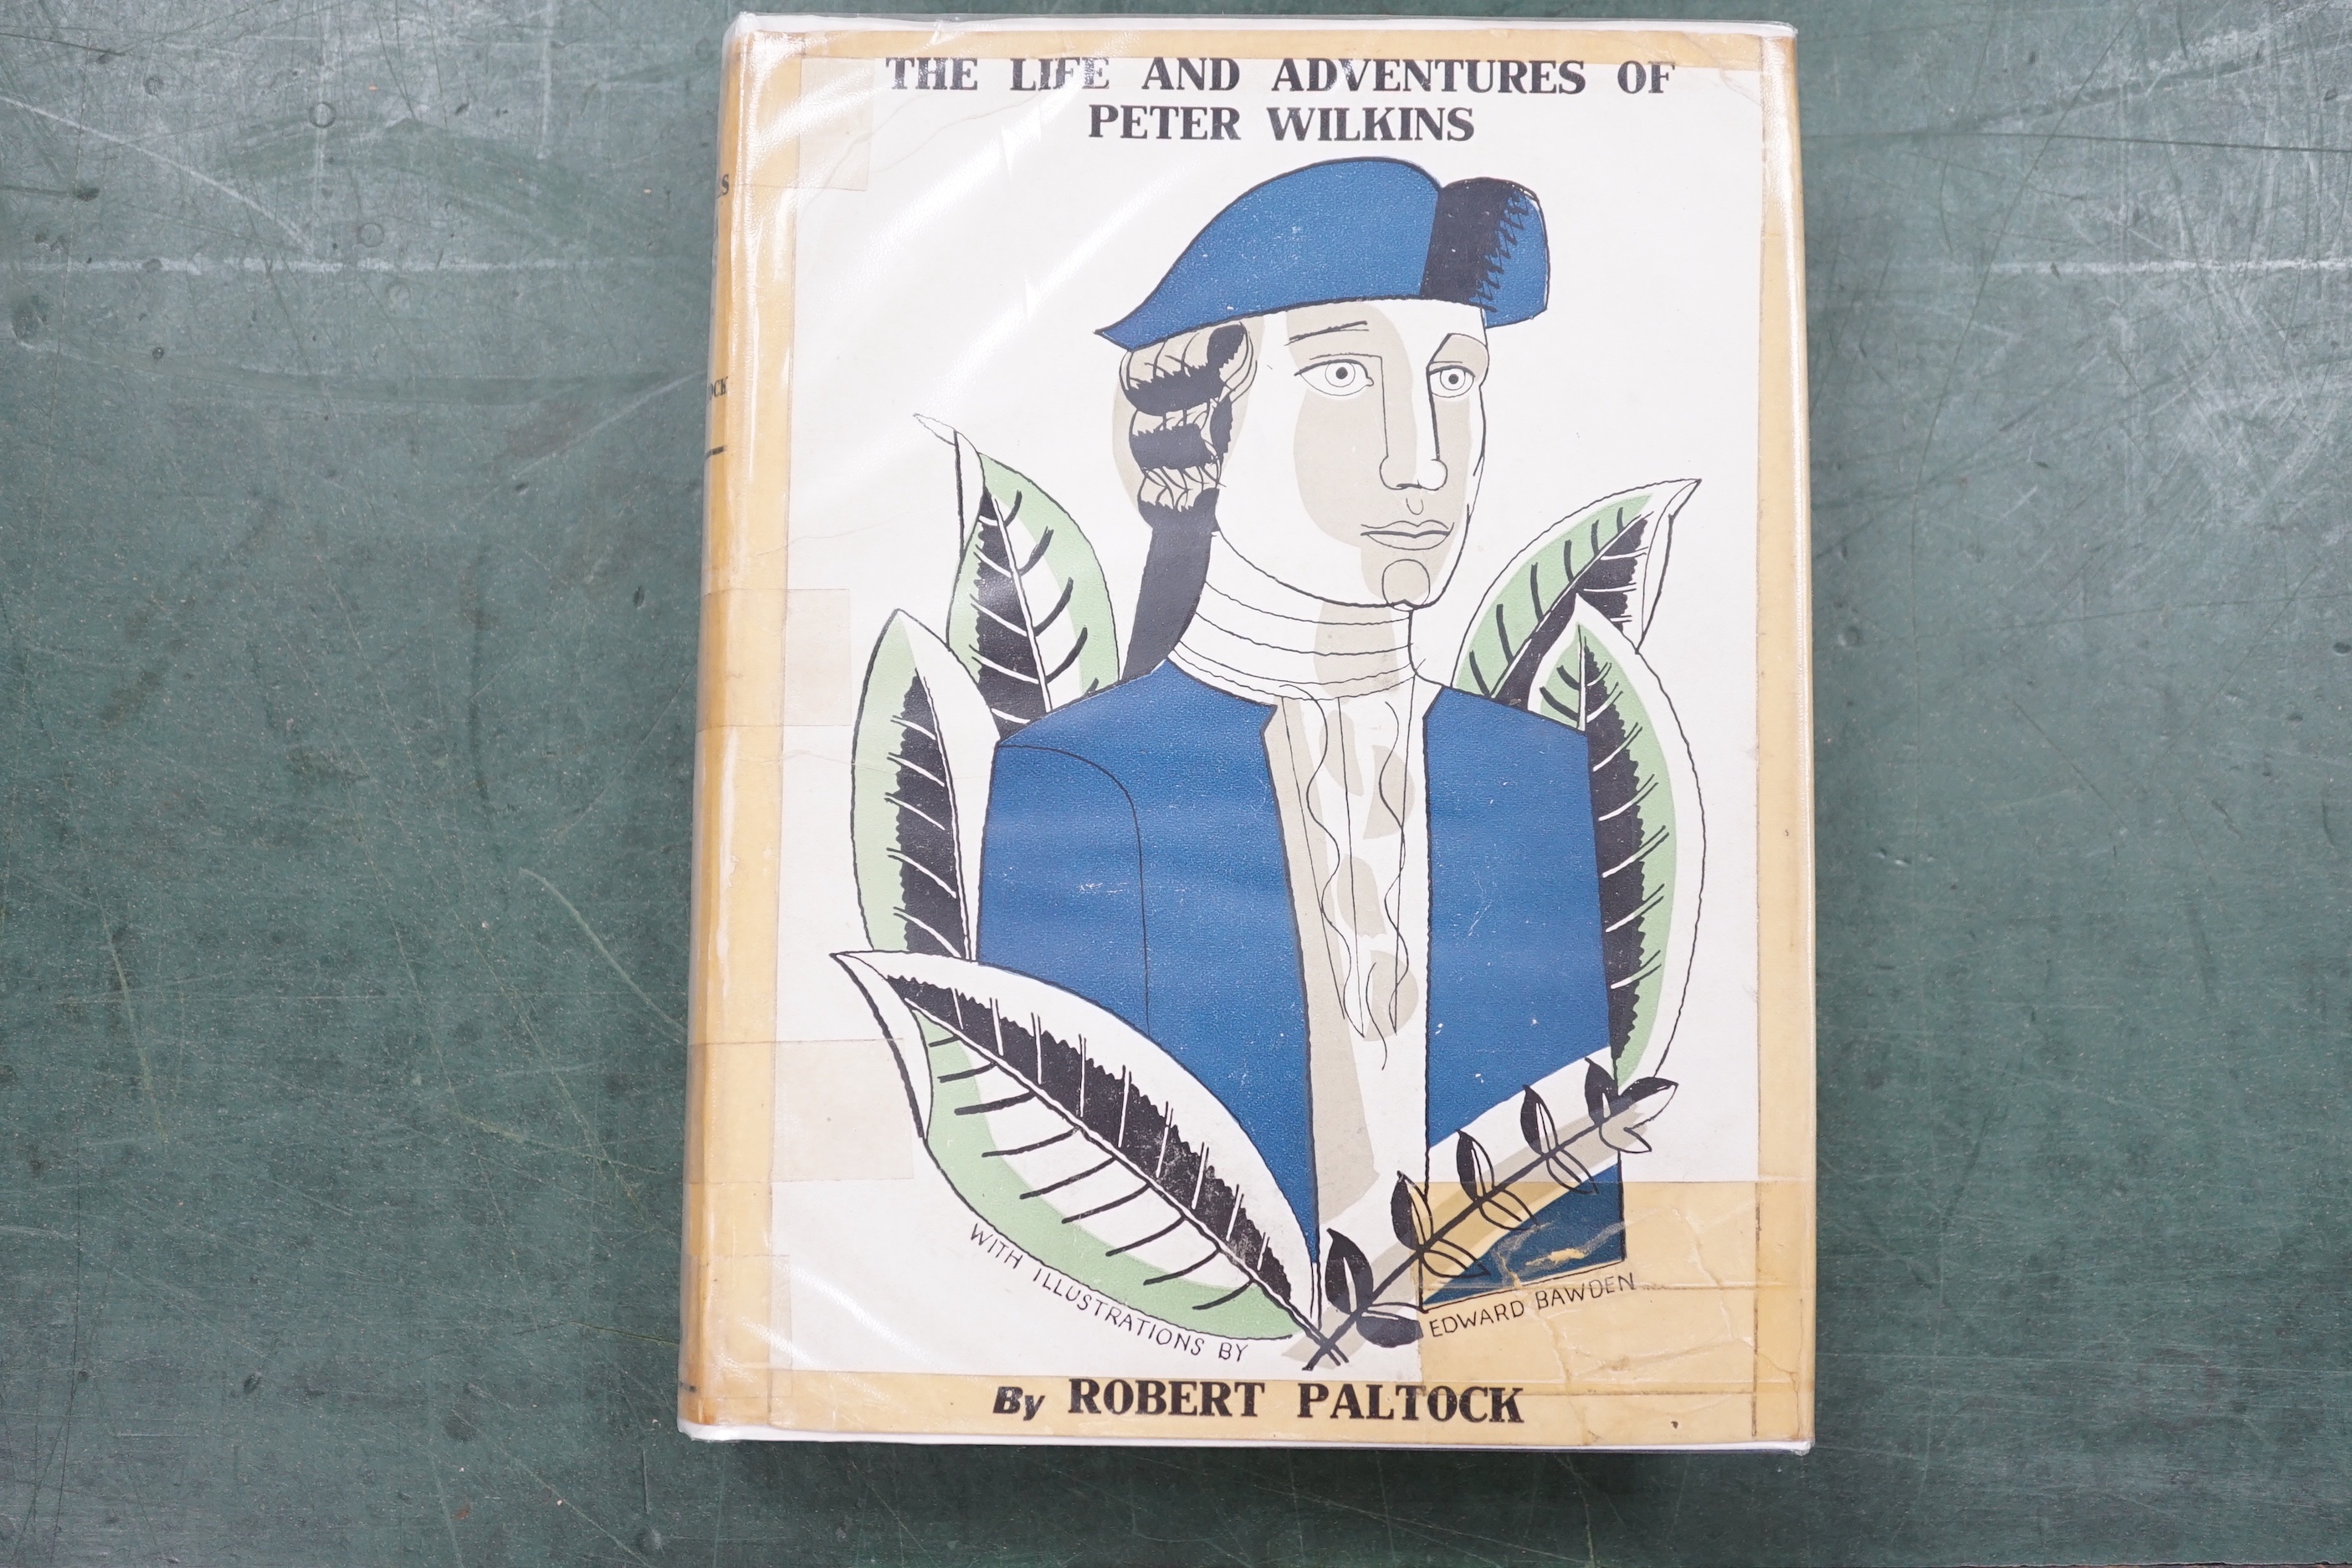 Bawden, Edward - 19 works, about or illustrated by:- Malory, Sir Thomas - Malory’s Chronicles of King Arthur, 3 vols, Folio Society, 1982, in slip case; Herodotus, translated by Harry Carter, one of 1500 signed by the il